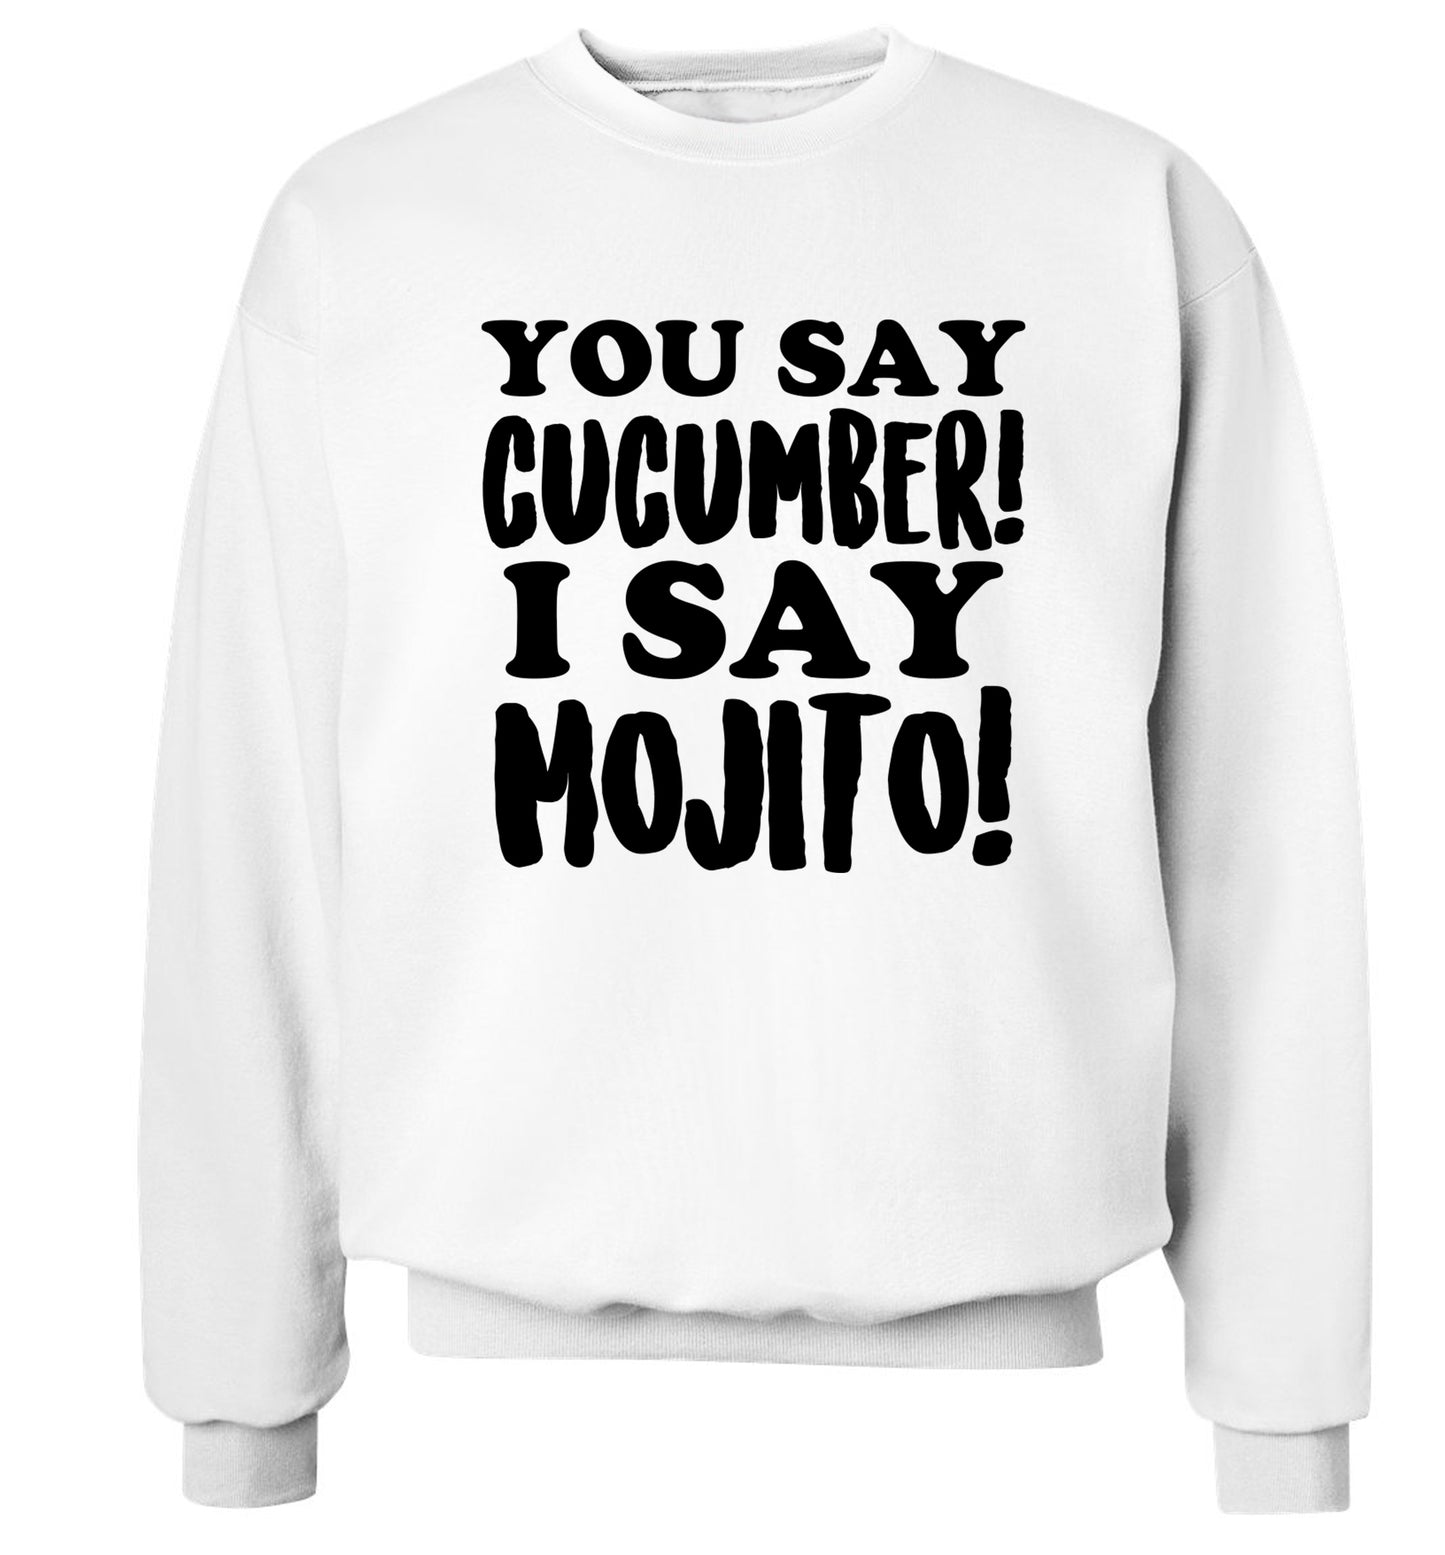 You say cucumber I say mojito! Adult's unisex white Sweater 2XL